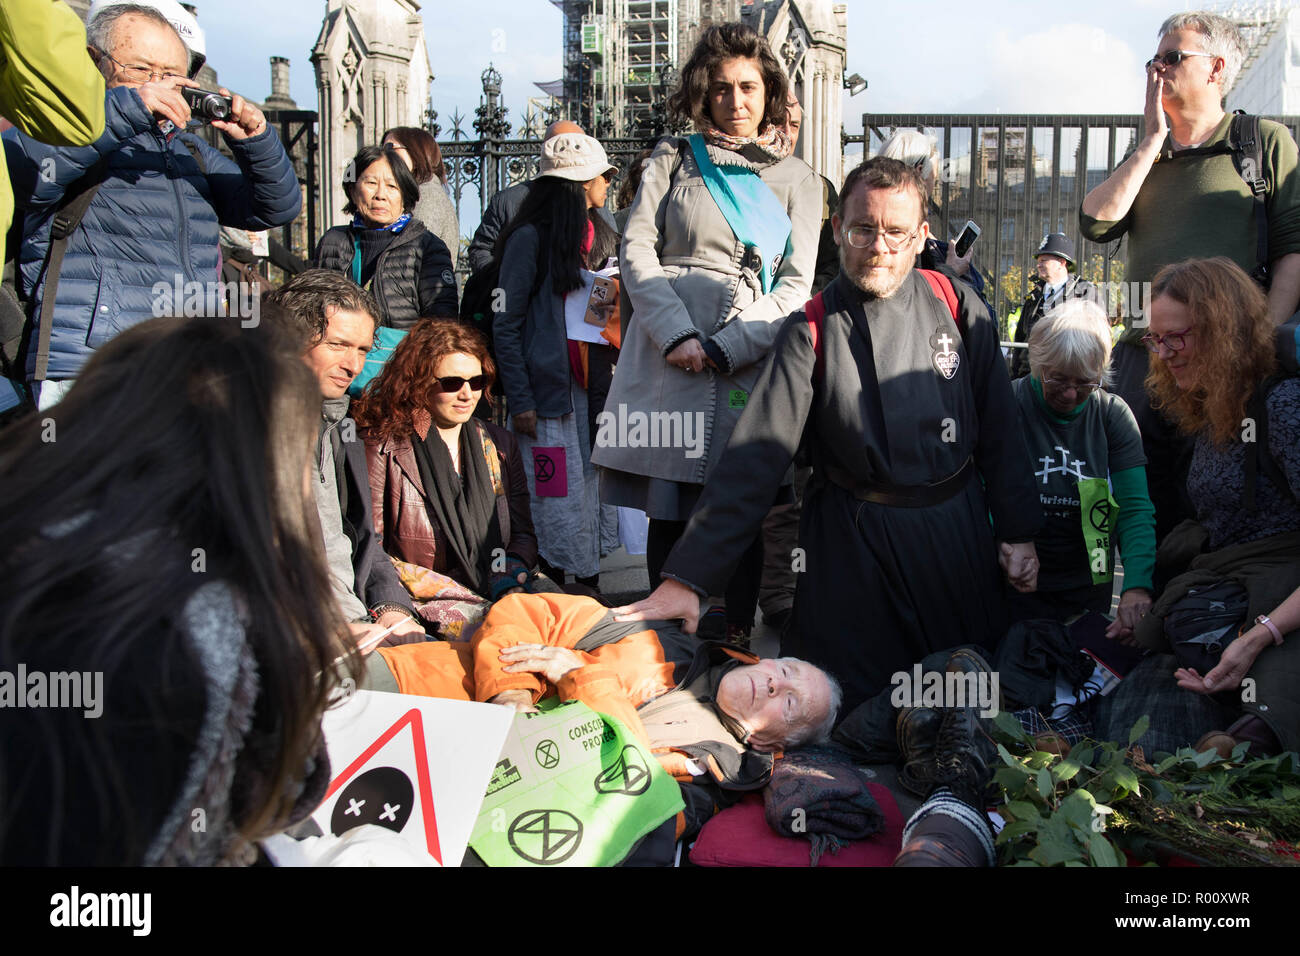 Protesters block Parliament Square in London as the environmental group Extinction Rebellion launches a mass civil disobedience campaign demanding action on climate change. Stock Photo